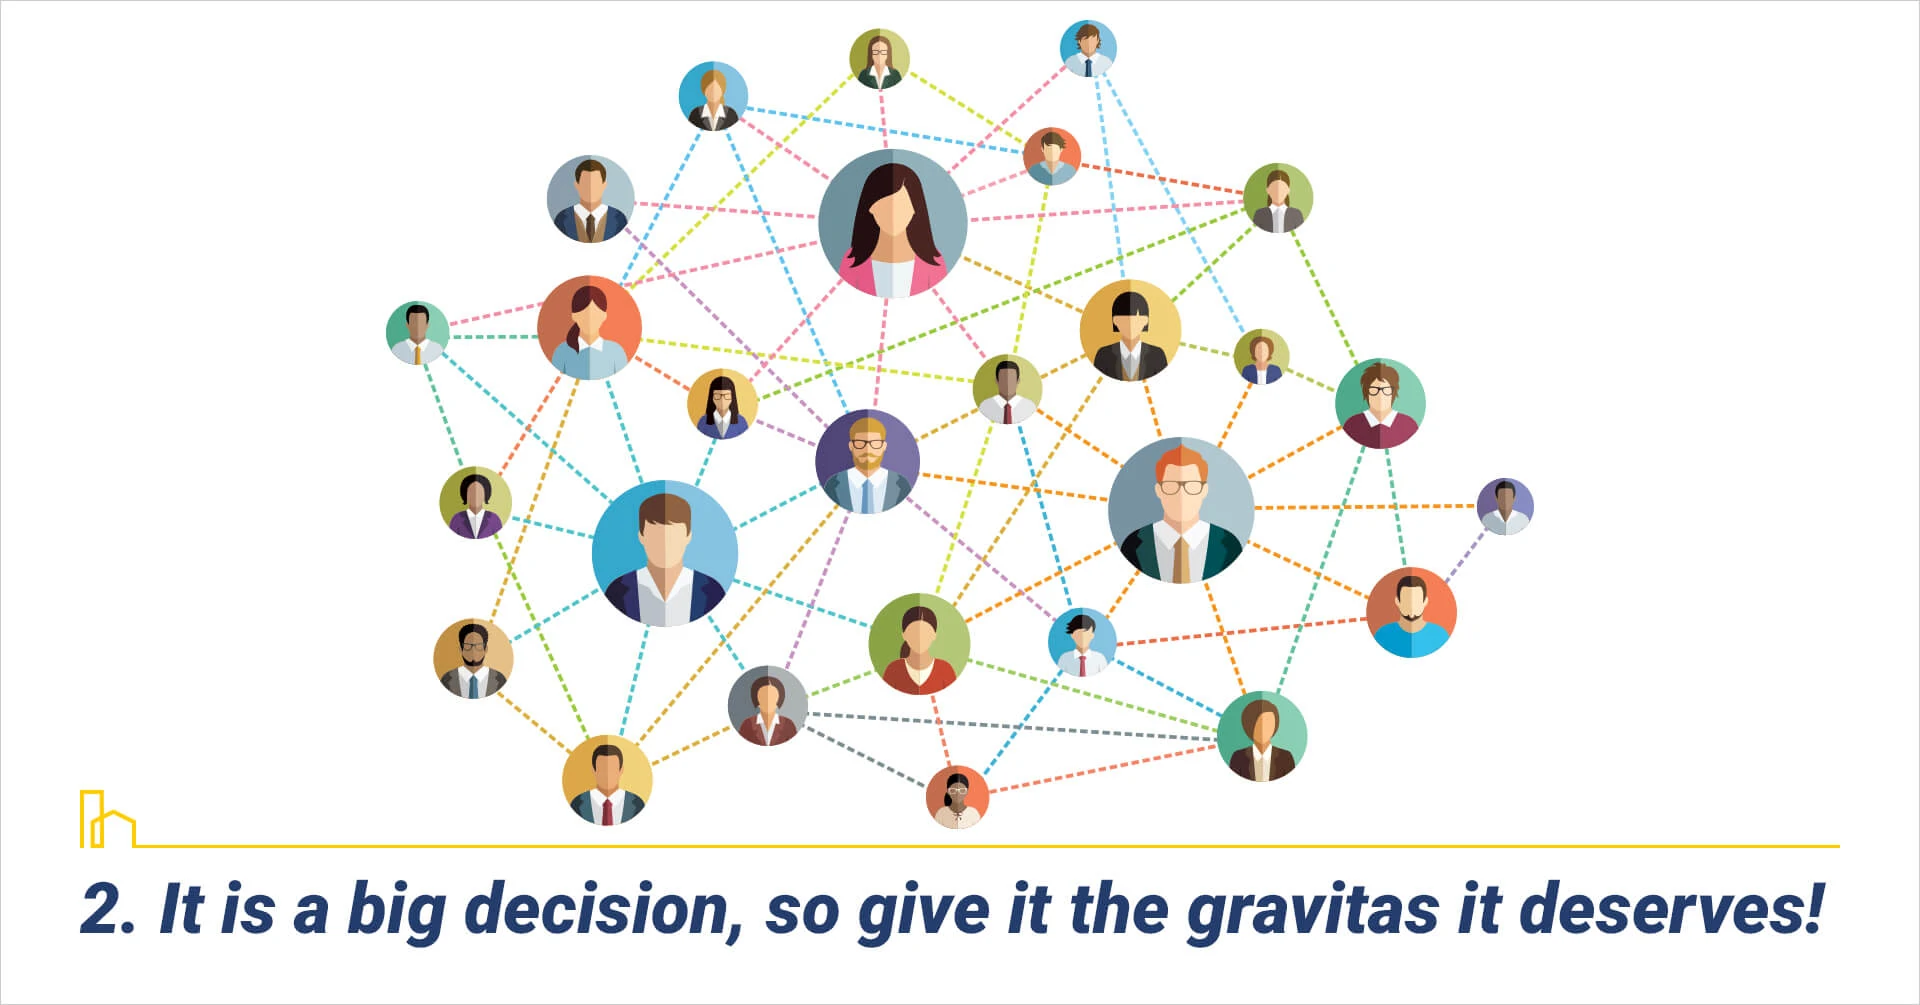 It is a big decision, so give it the gravitas it deserves! Take your time